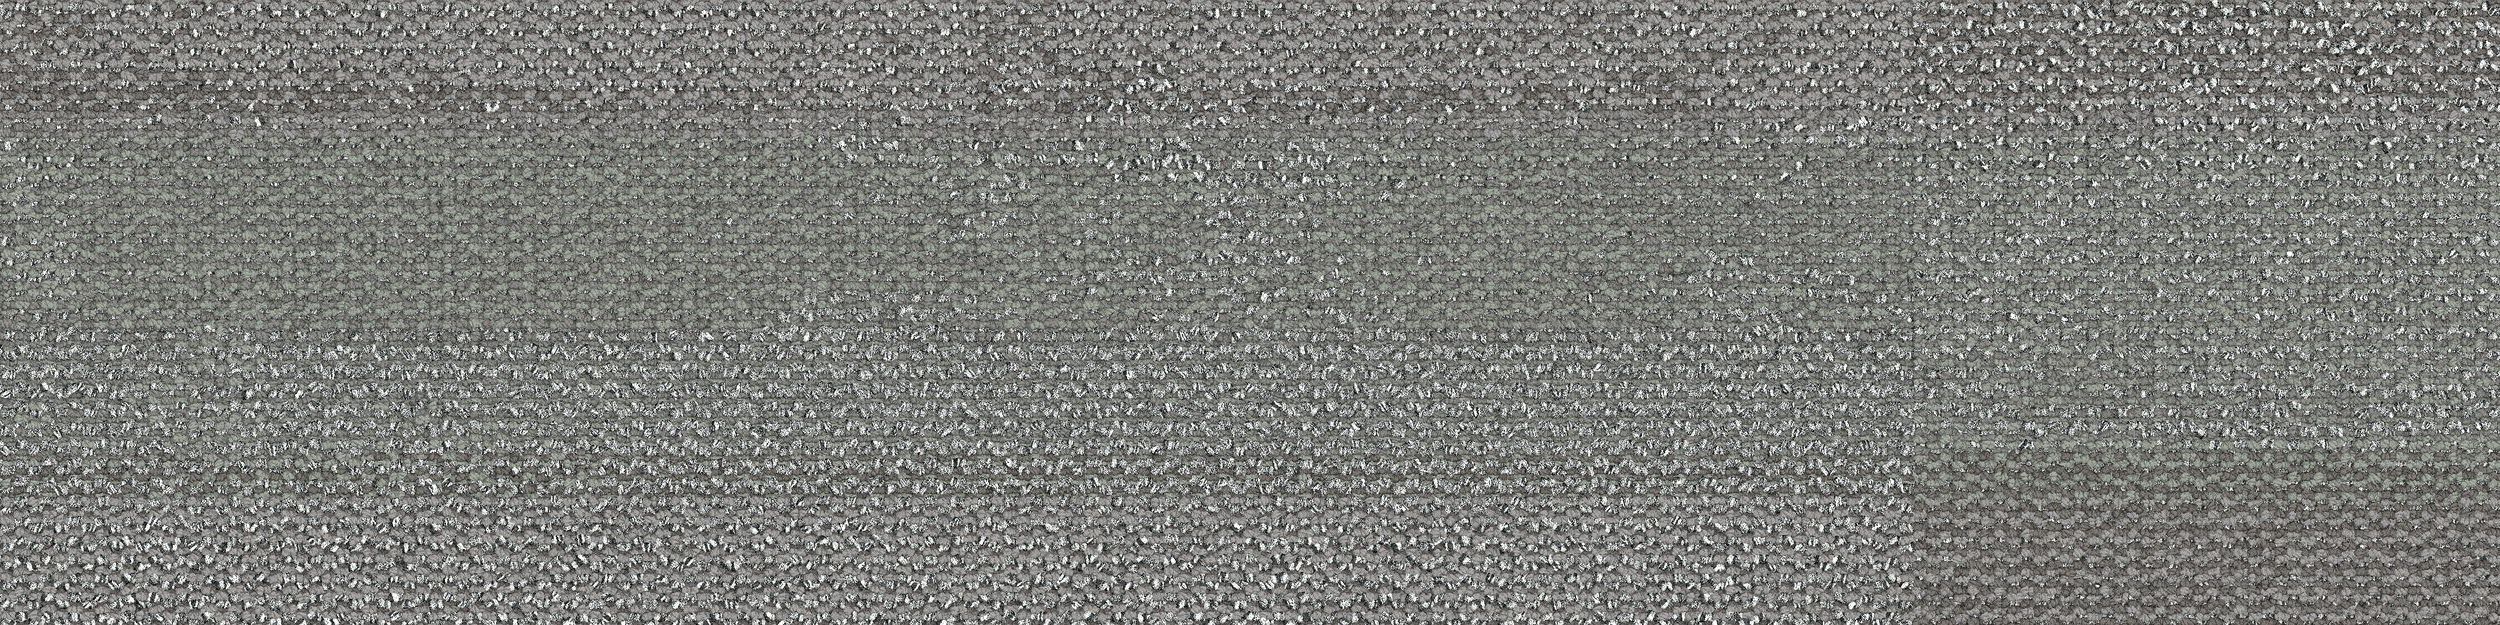 Naturally Weathered Carpet Tile In Slate Grey image number 3